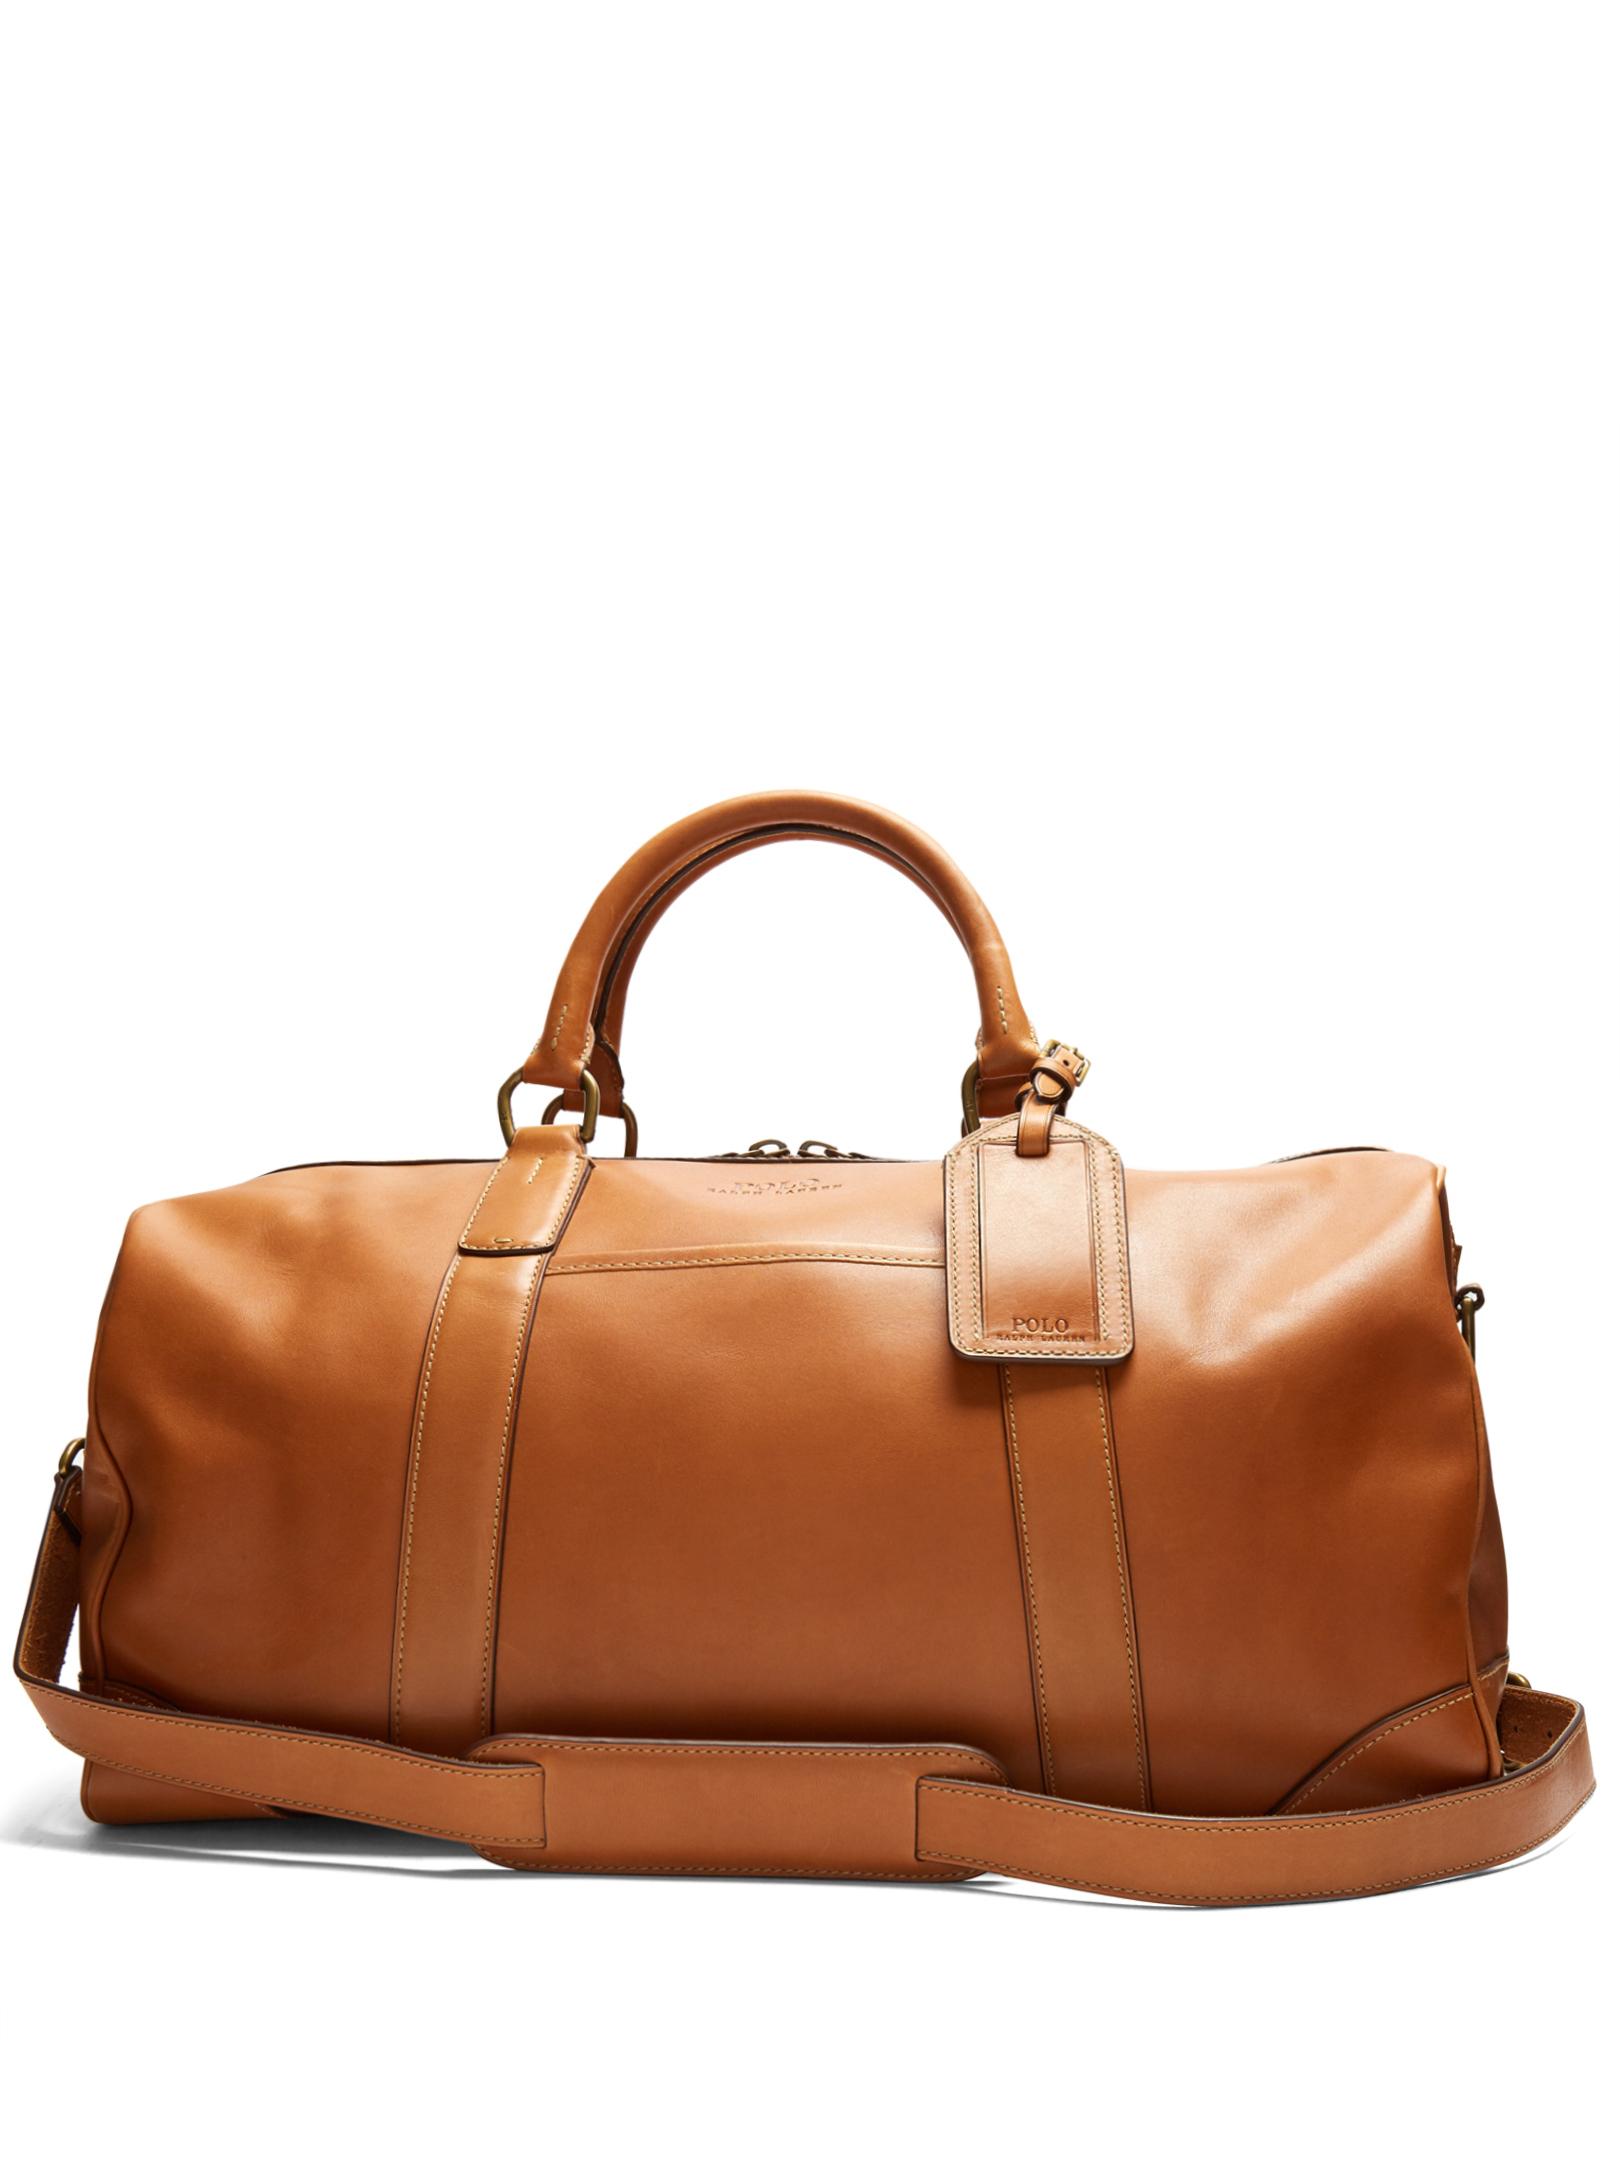 Polo Ralph Lauren Leather Duffle Bag in Brown for Men | Lyst